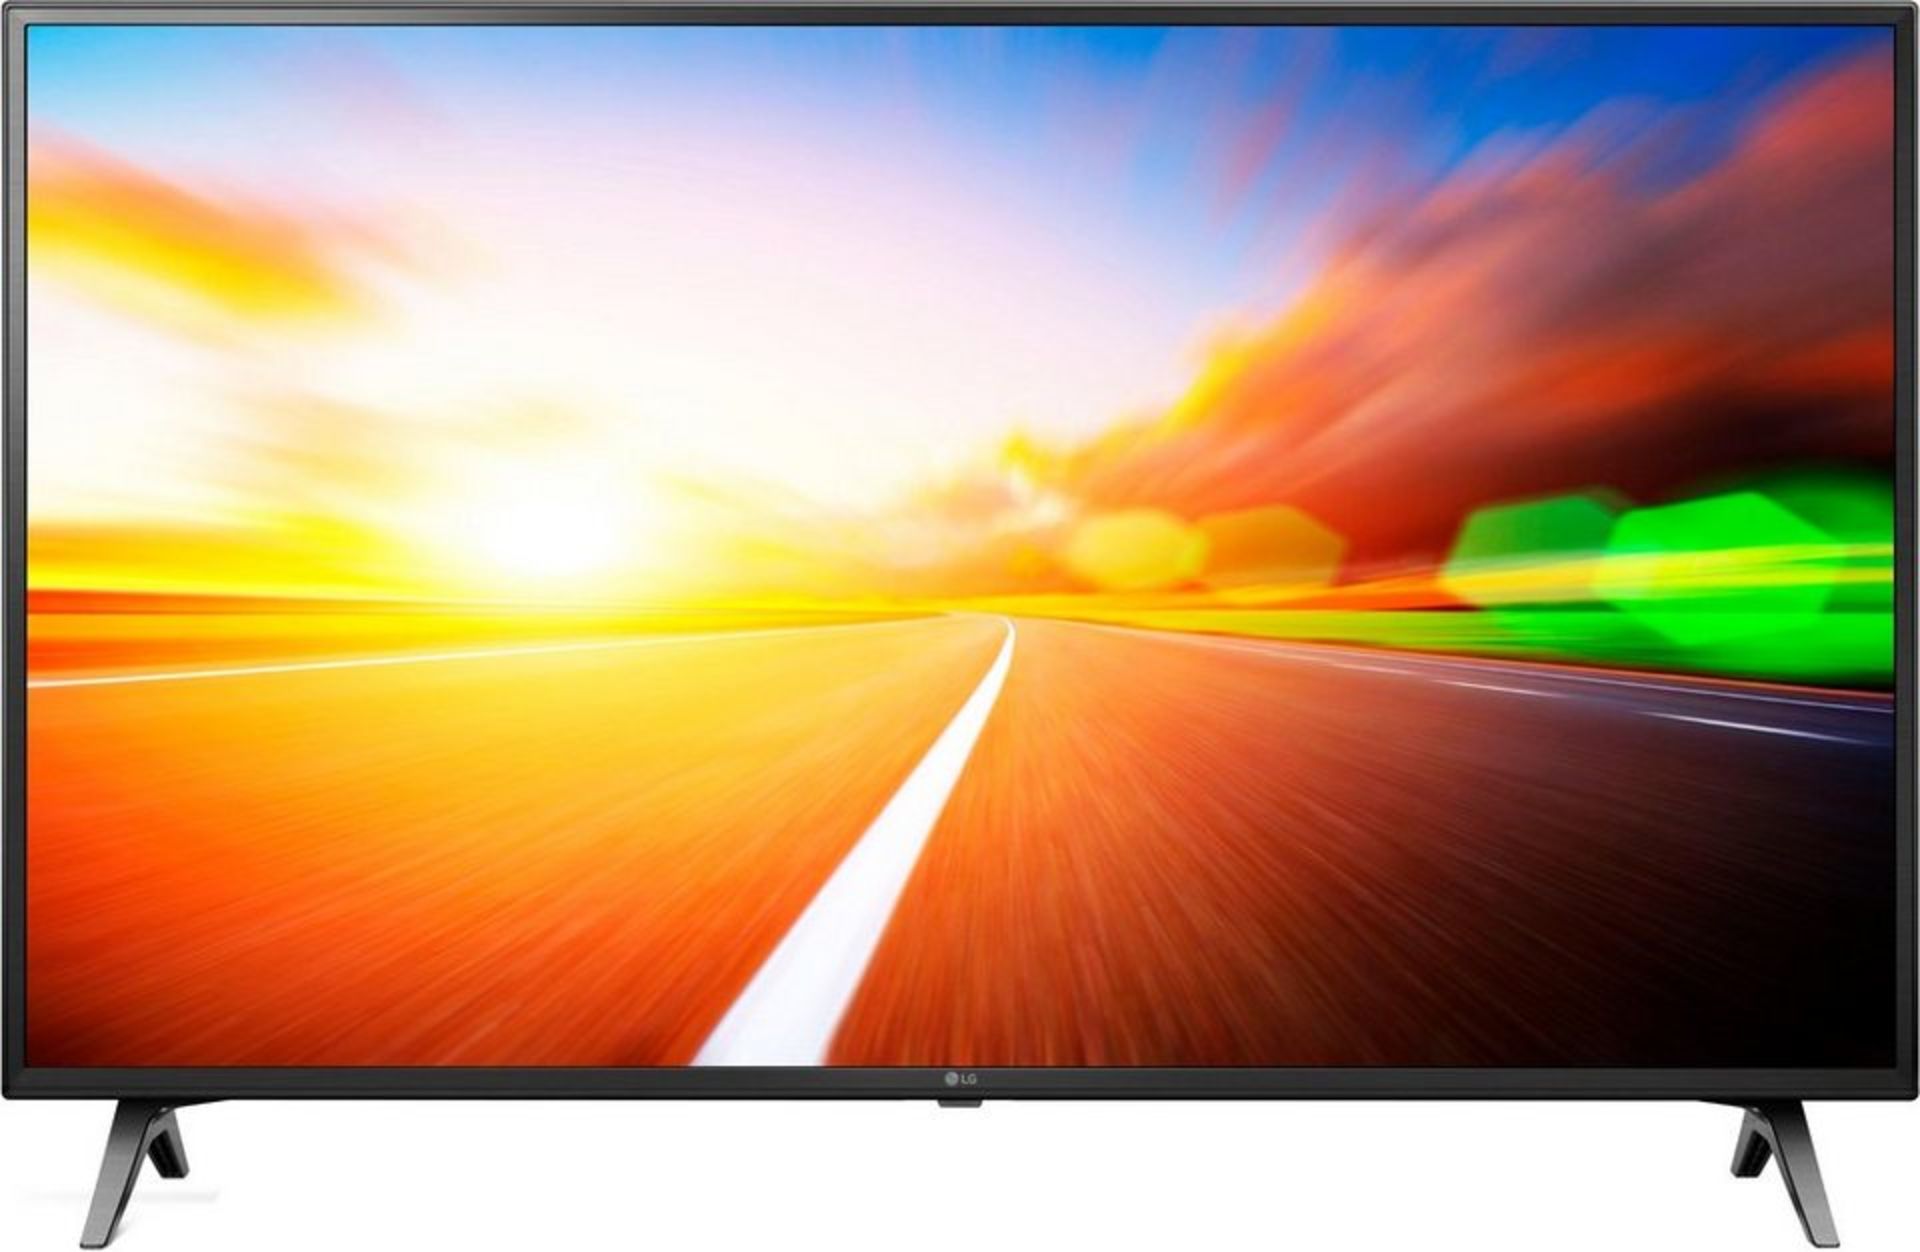 V Grade A LG 55 Inch ACTIVE HDR 4K ULTRA HD LED SMART TV WITH FREEVIEW HD & WEBOS & WIFI - AI TV